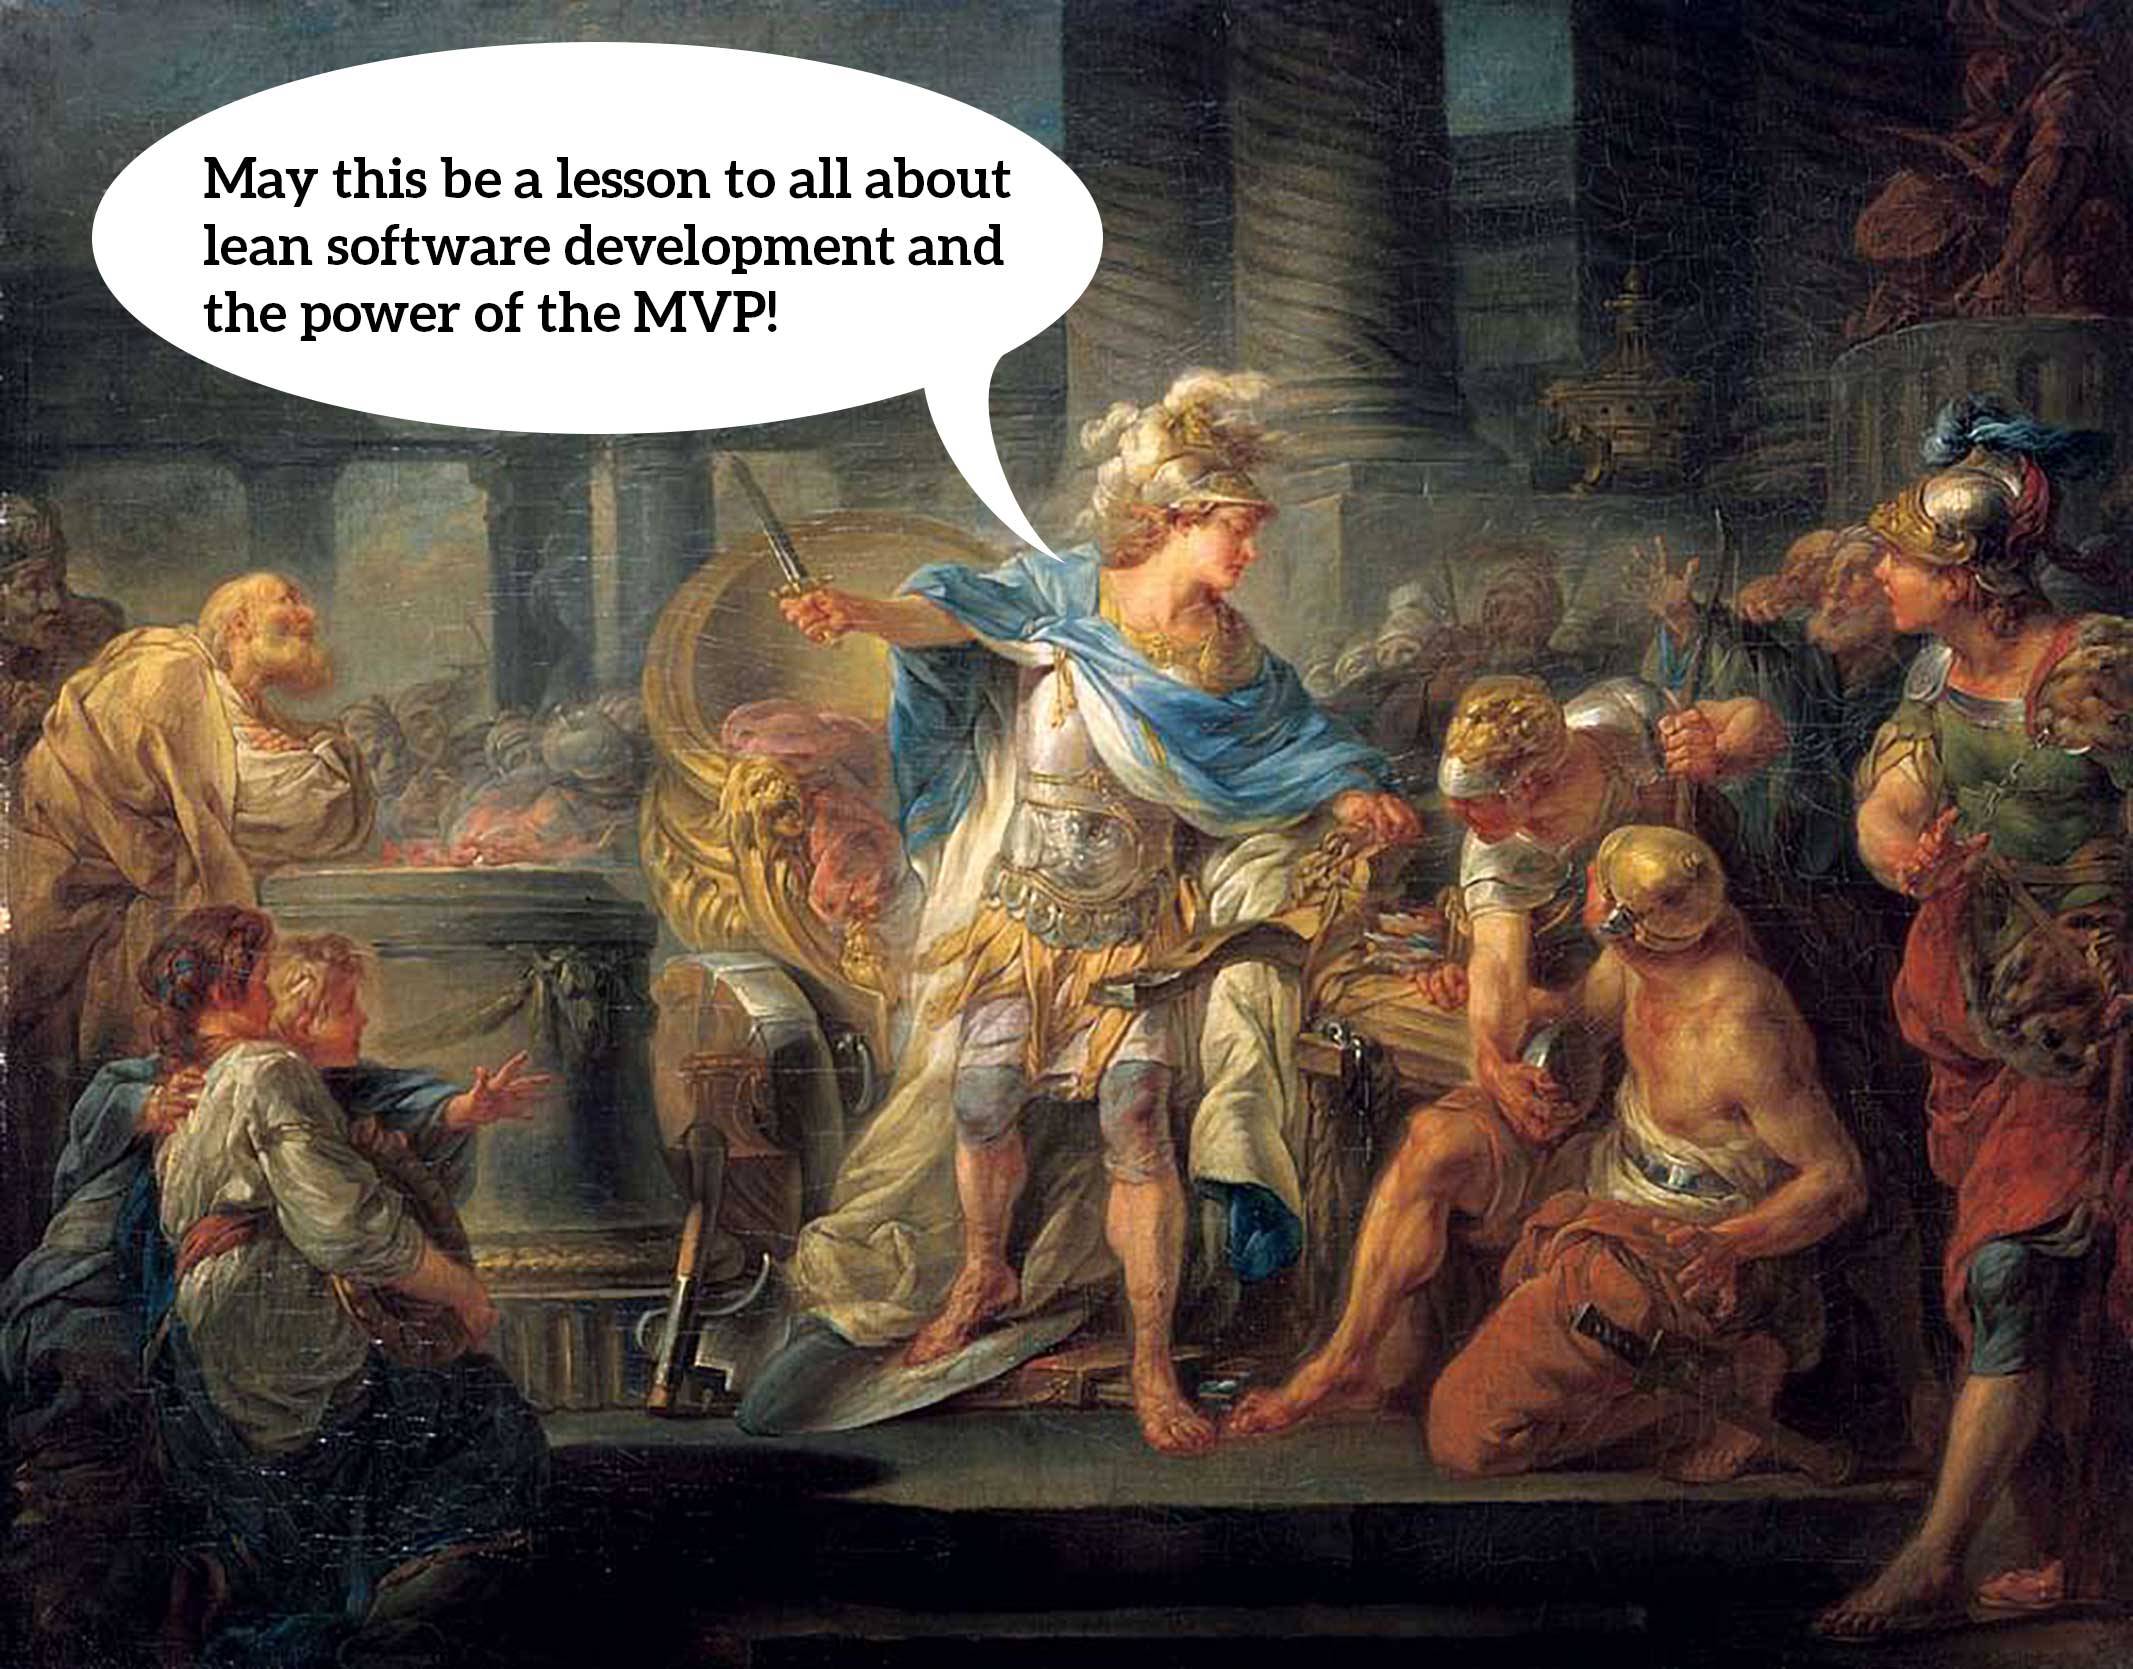 Alexandar the Great cuts the knot and declares a new precedent for software!